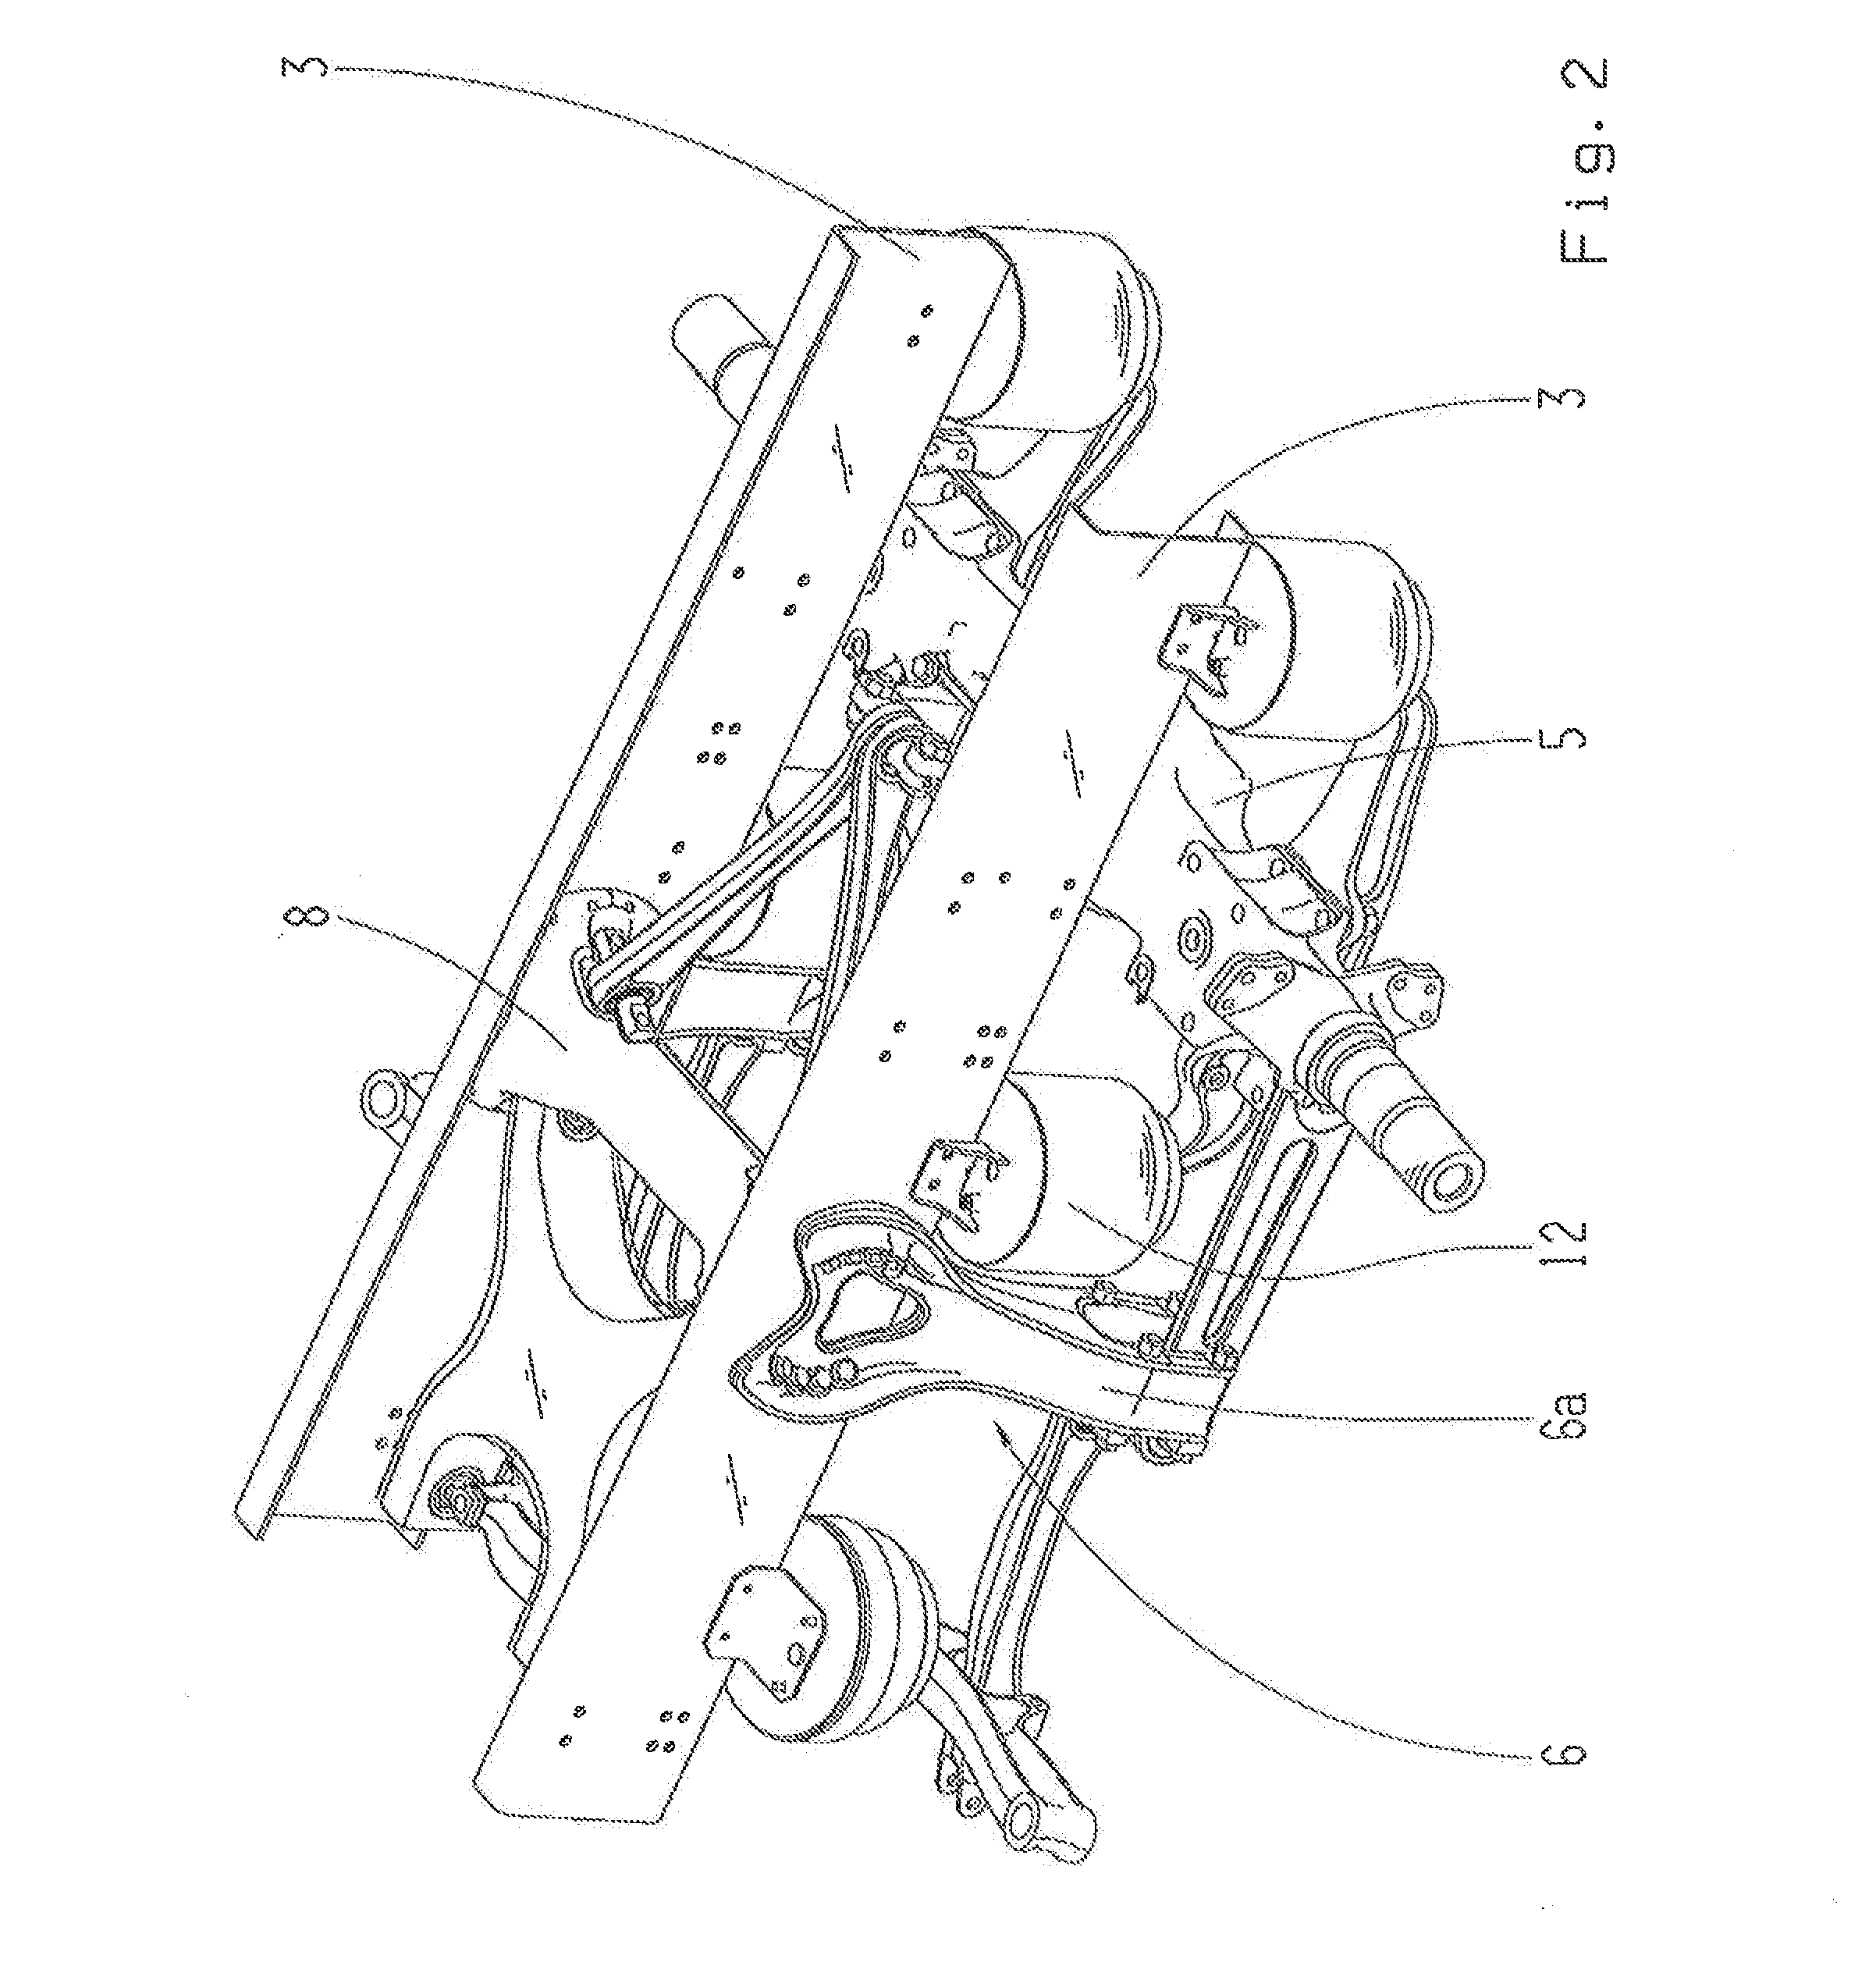 Motor vehicle with a vehicle frame